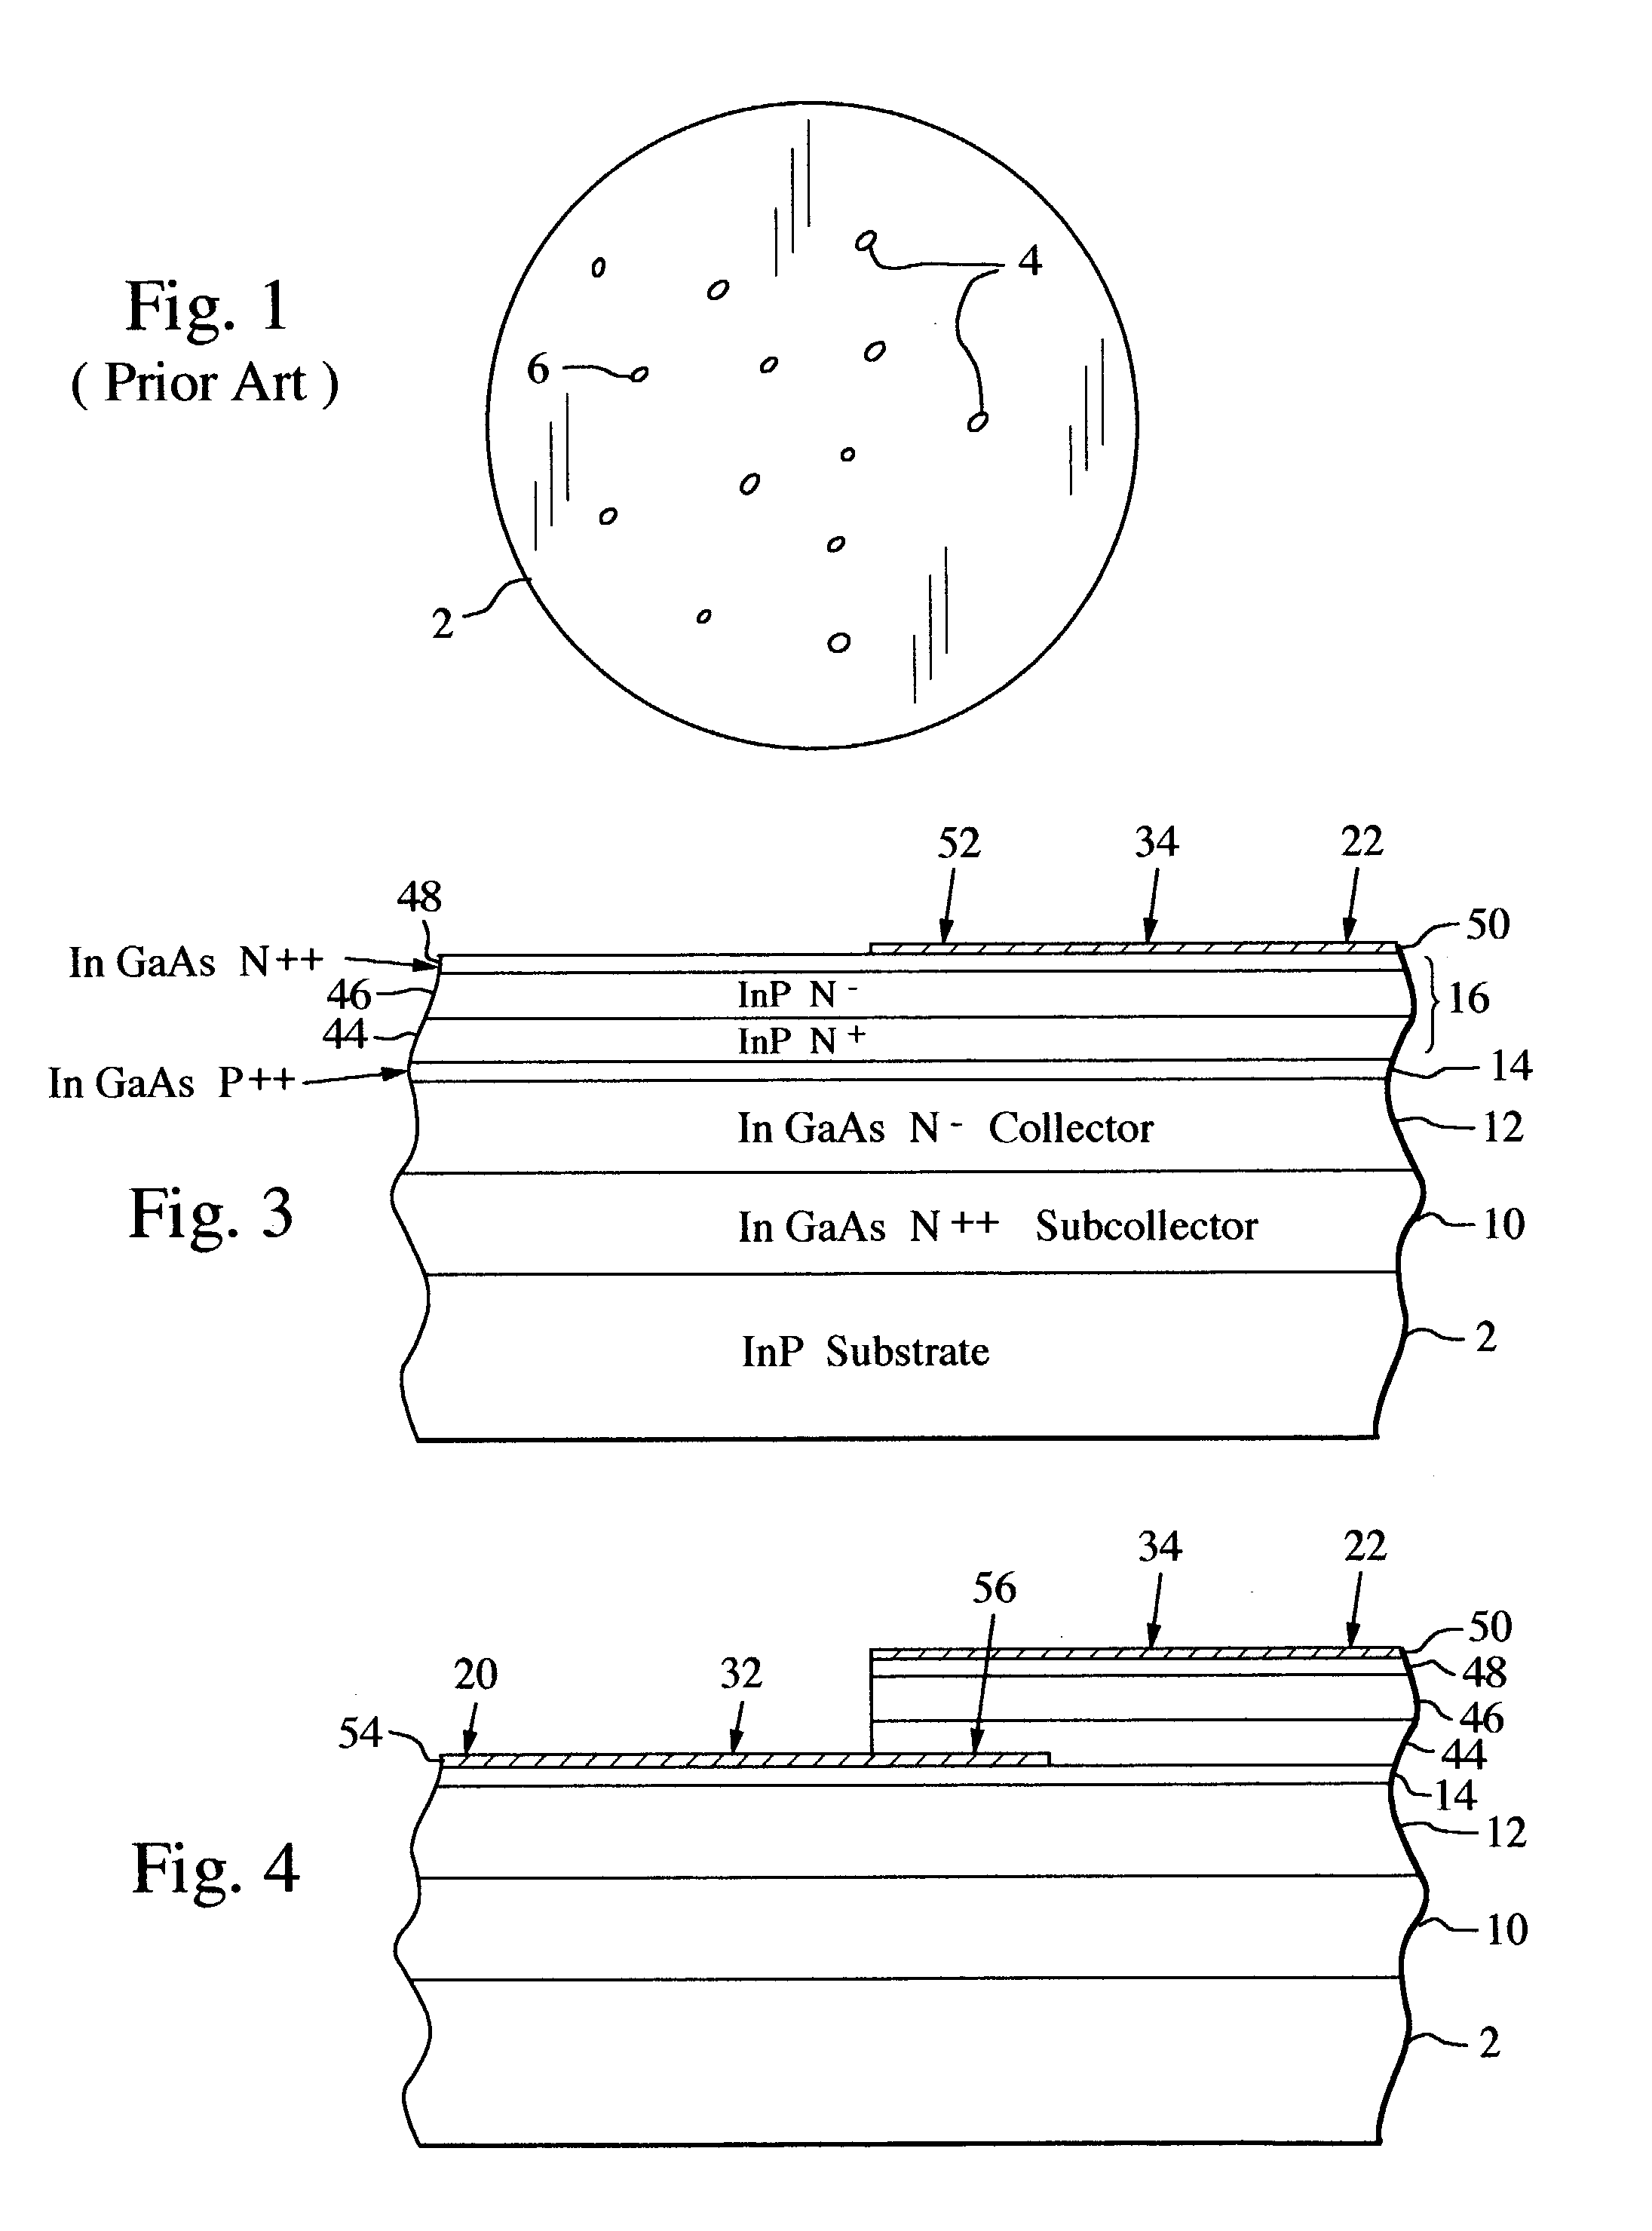 Bipolar transistor test structure with lateral test probe pads